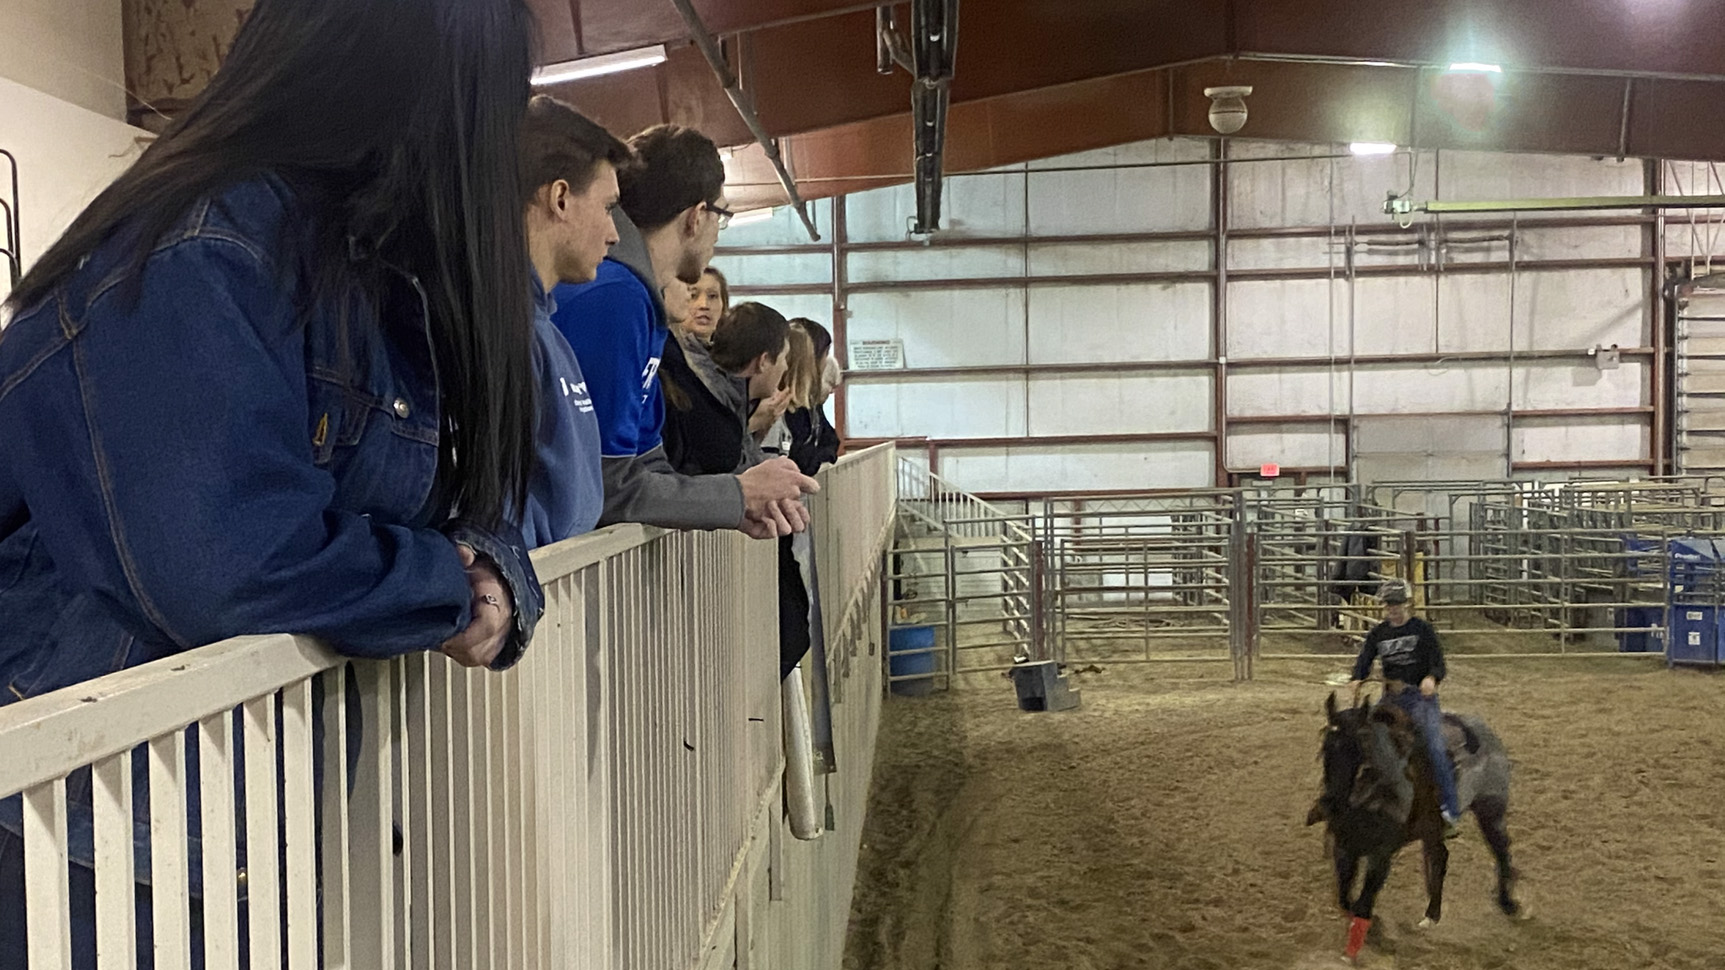 A riding demonstration was featured at Discovery Day in March, 2020 in the indoor arena at the Nebraska College of Technical Agriculture. Campus visits are open at NCTA in Curtis. (A. Bassett / NCTA News)